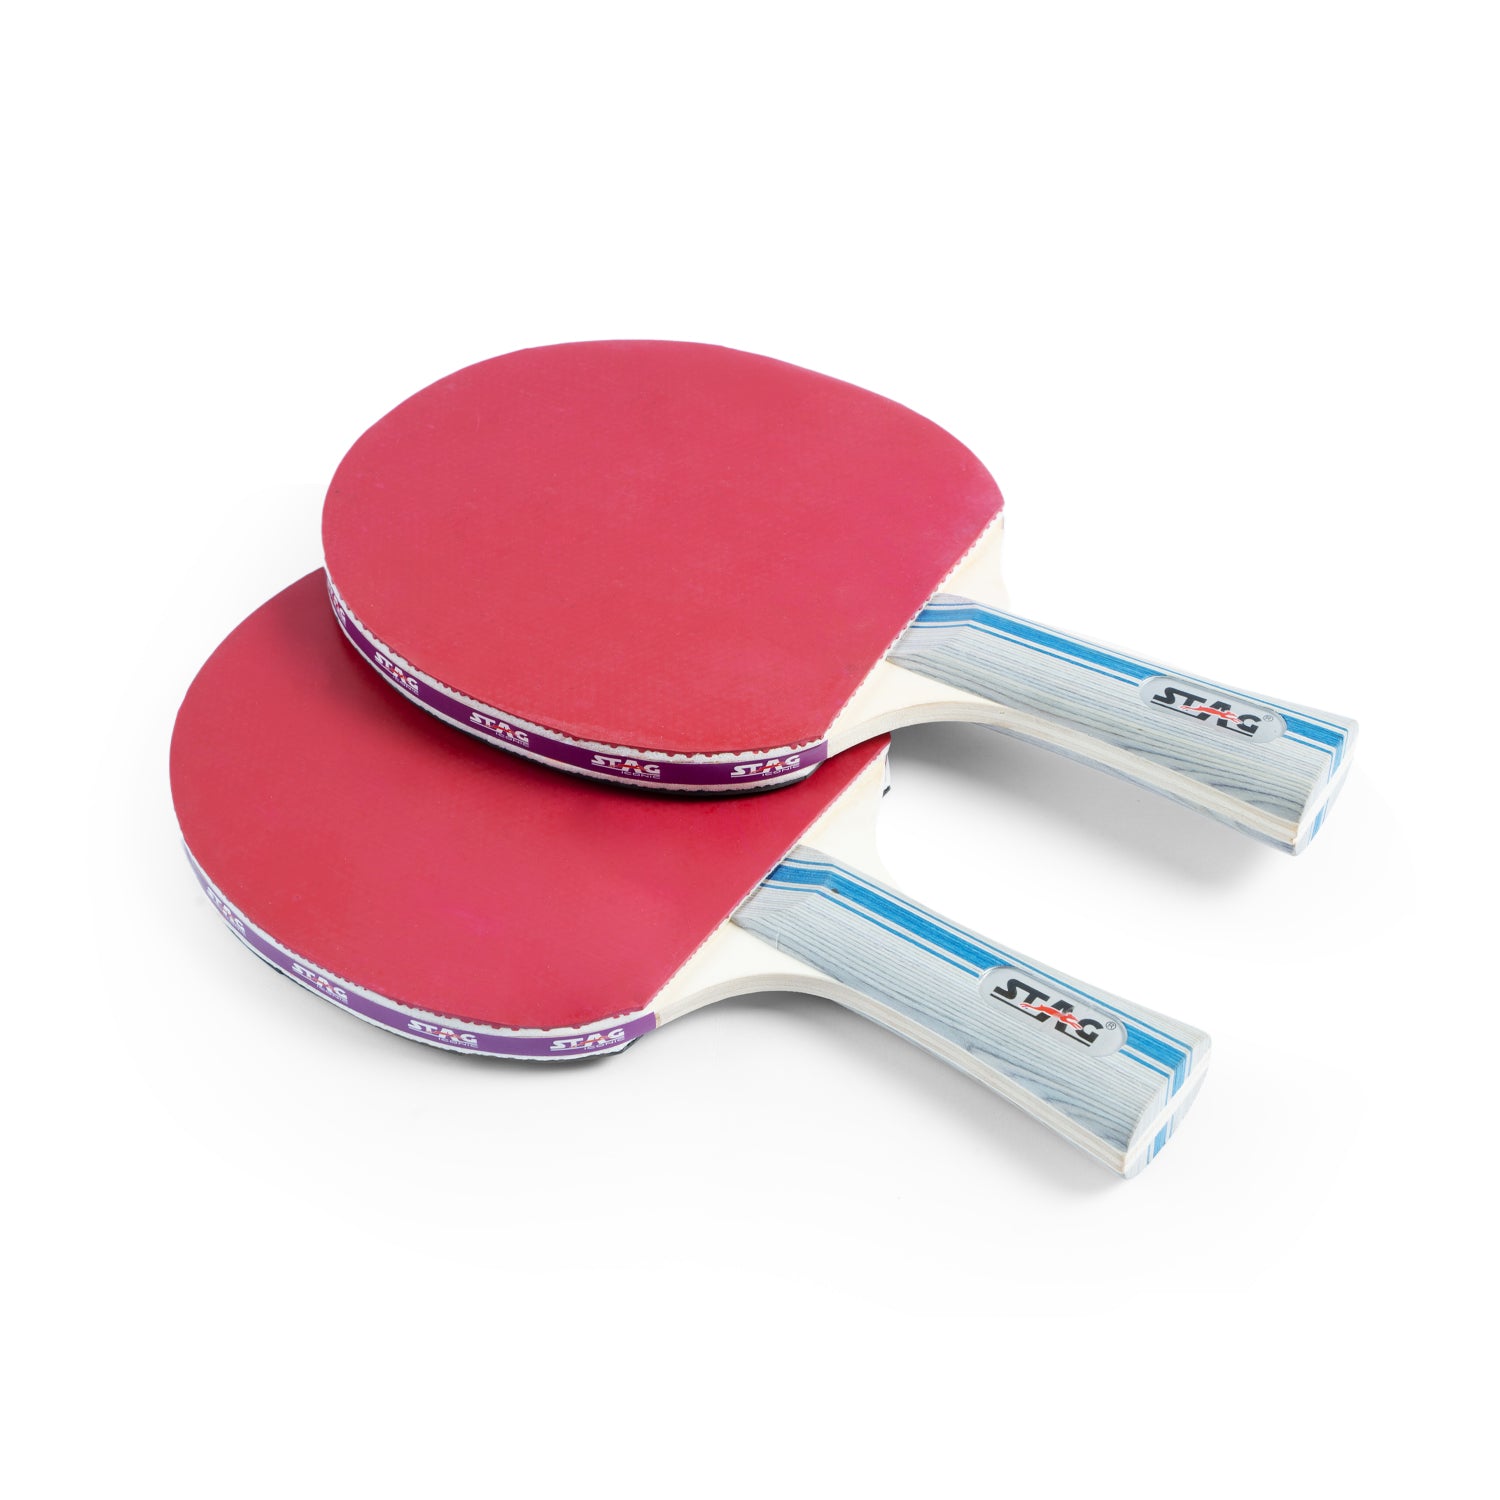 STAG Table Tennis playset Smash (T.T SET) - Recreational Series